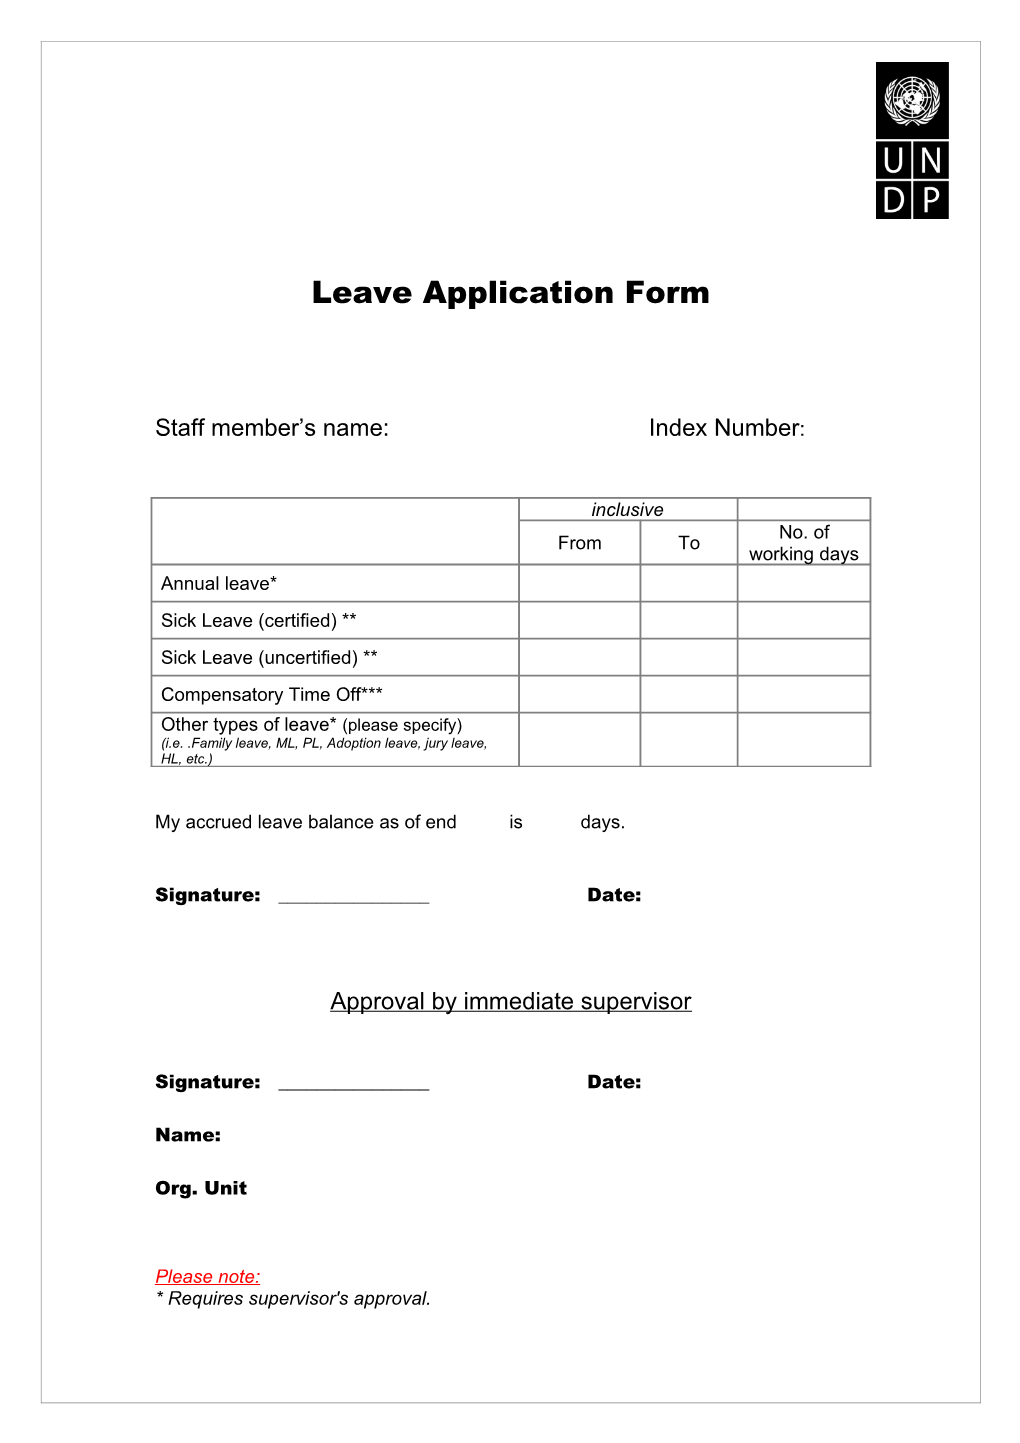 Leave Application/Request For Leave Form